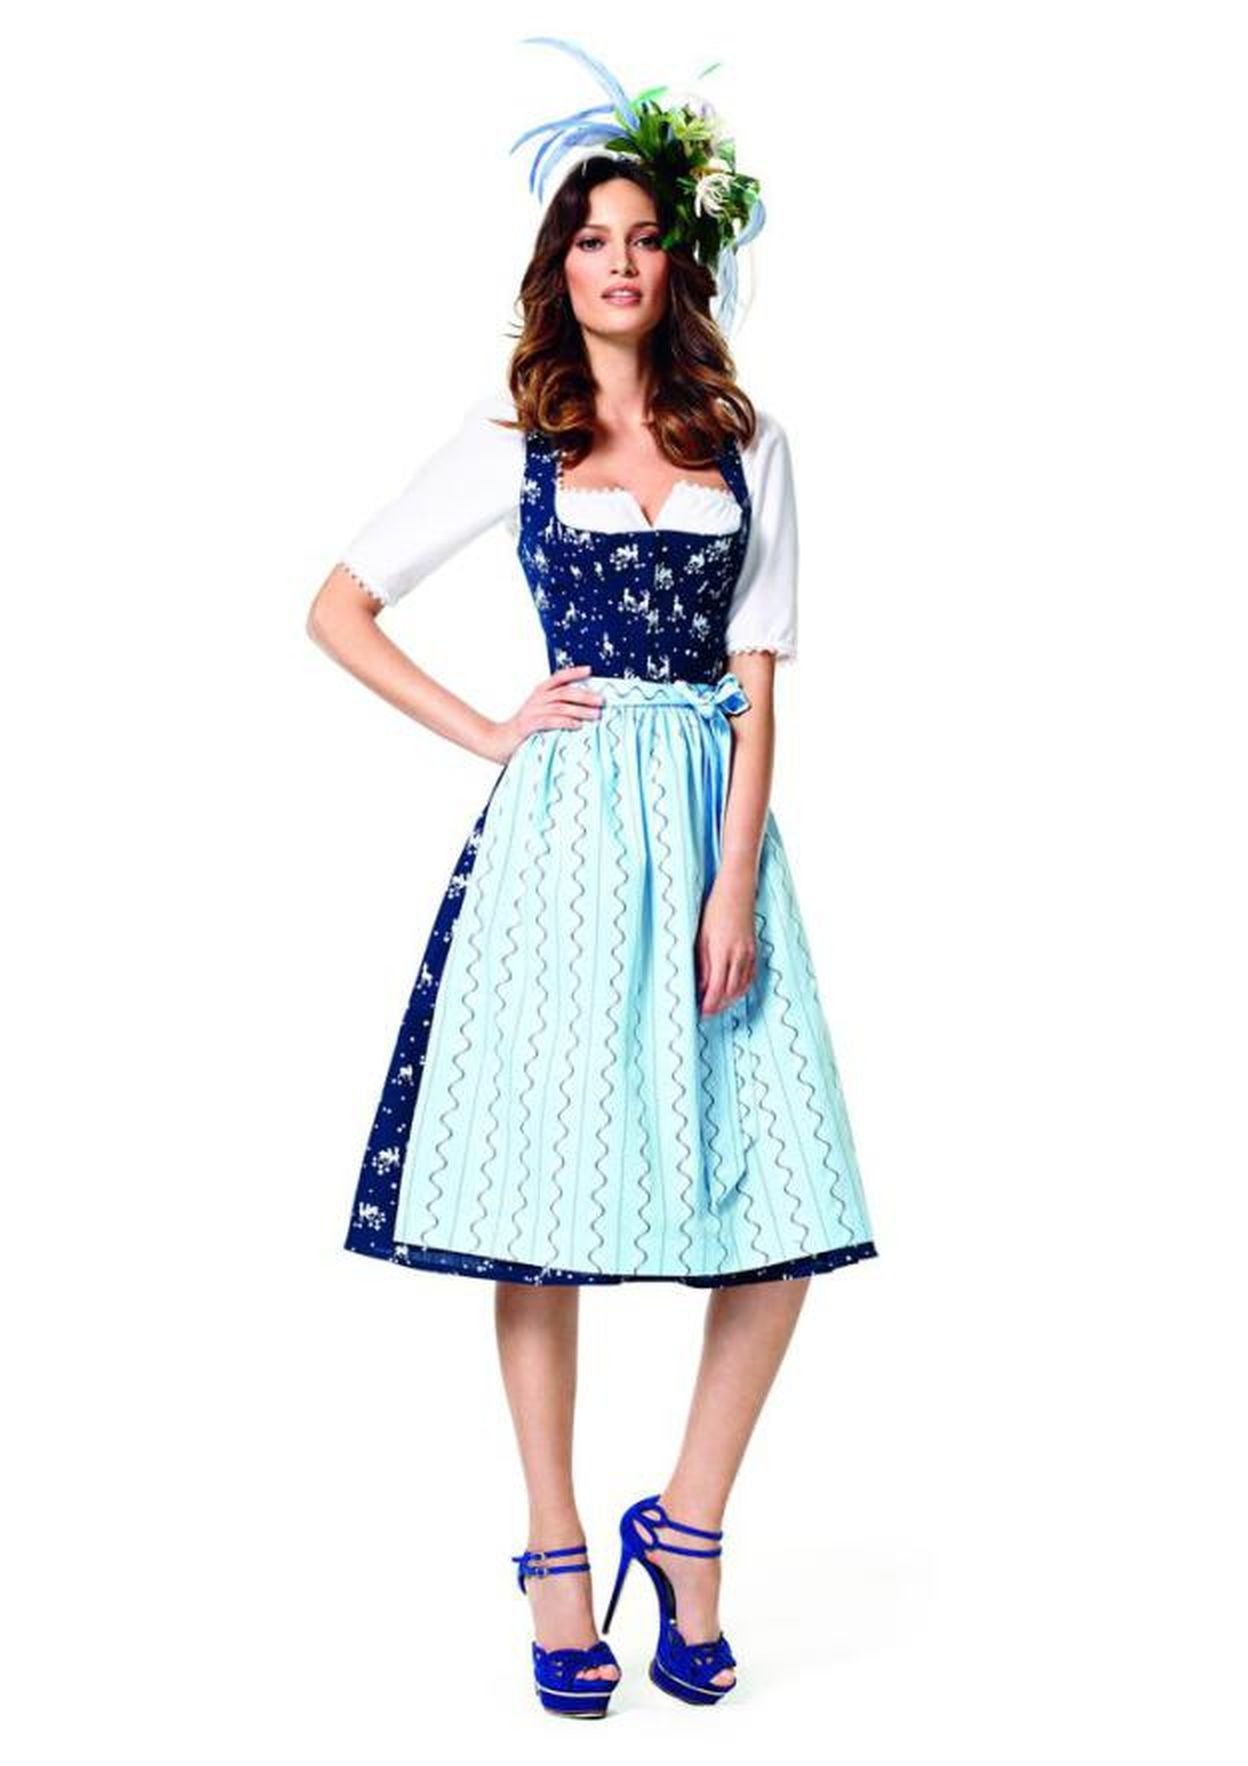 Wilkommen to the Dirndlfest! The New York Times and American Vogue recently noted and paid homage to the dirndl, calling it 'the most flattering dress a woman can wear' and the new fashion 'must-have'. 

I am delighted, therefore, to bring you a